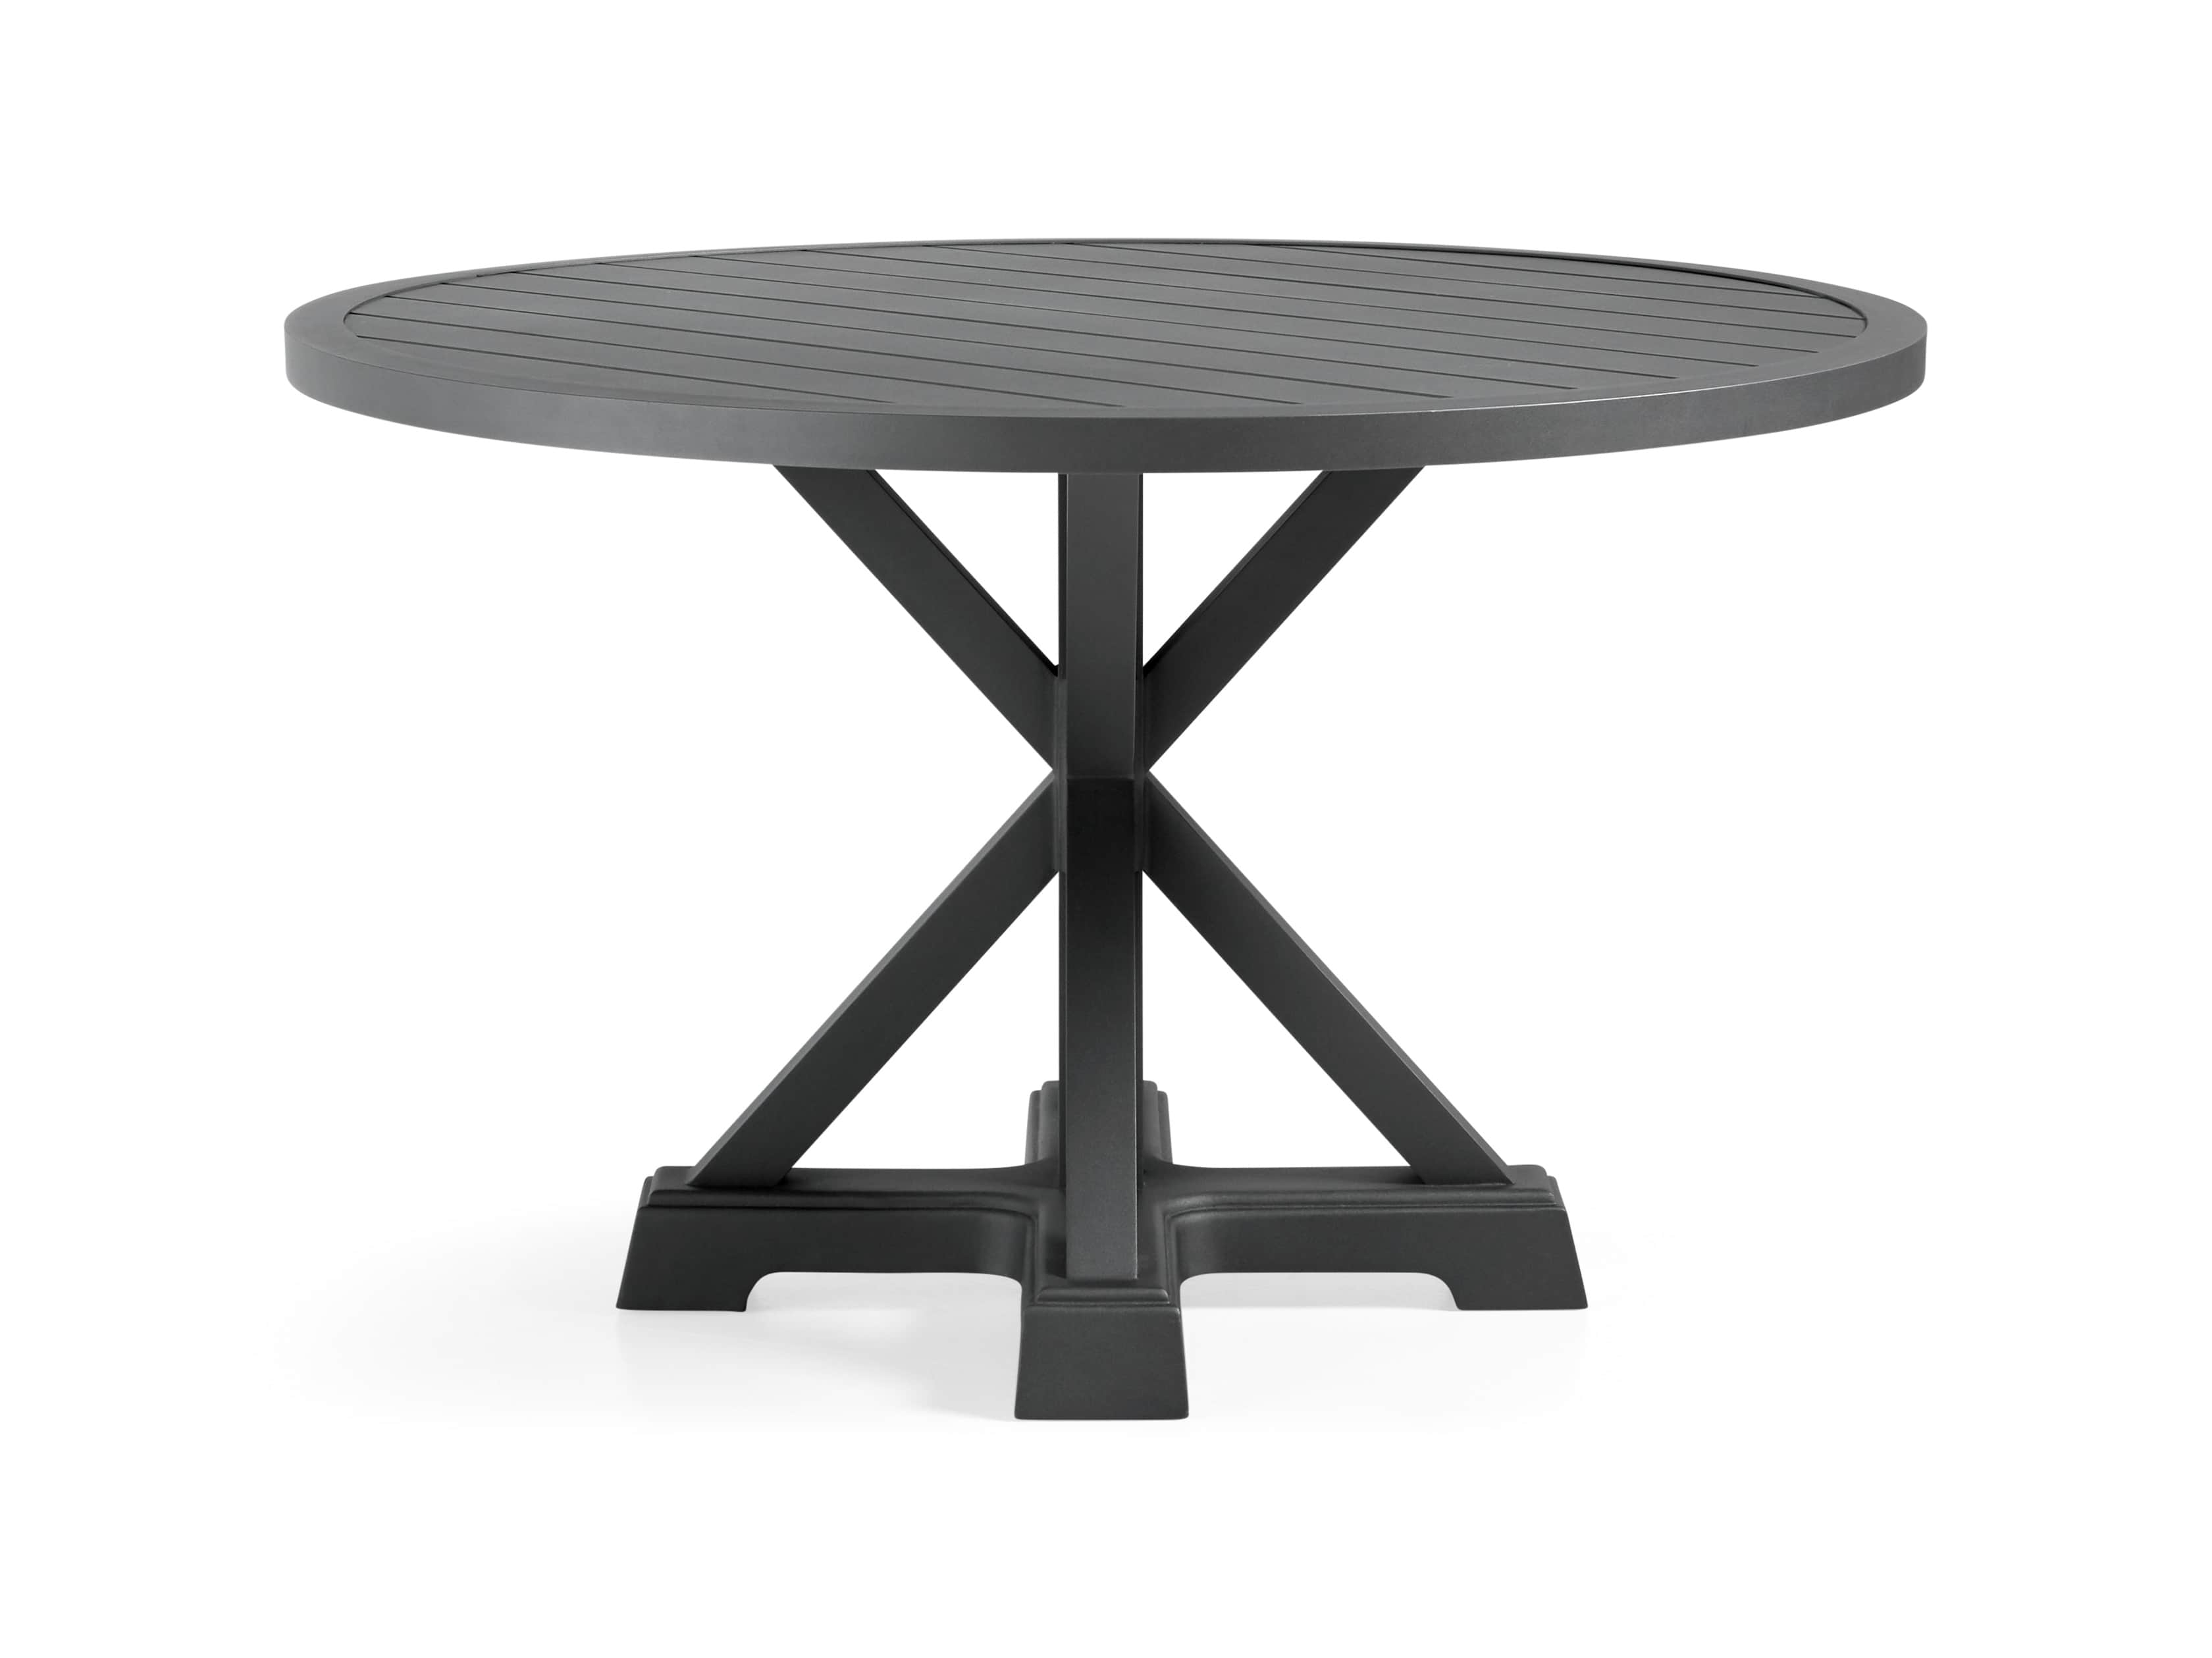 Montego Outdoor Round Dining Table Arhaus, Black Round Outdoor Dining Table For 6